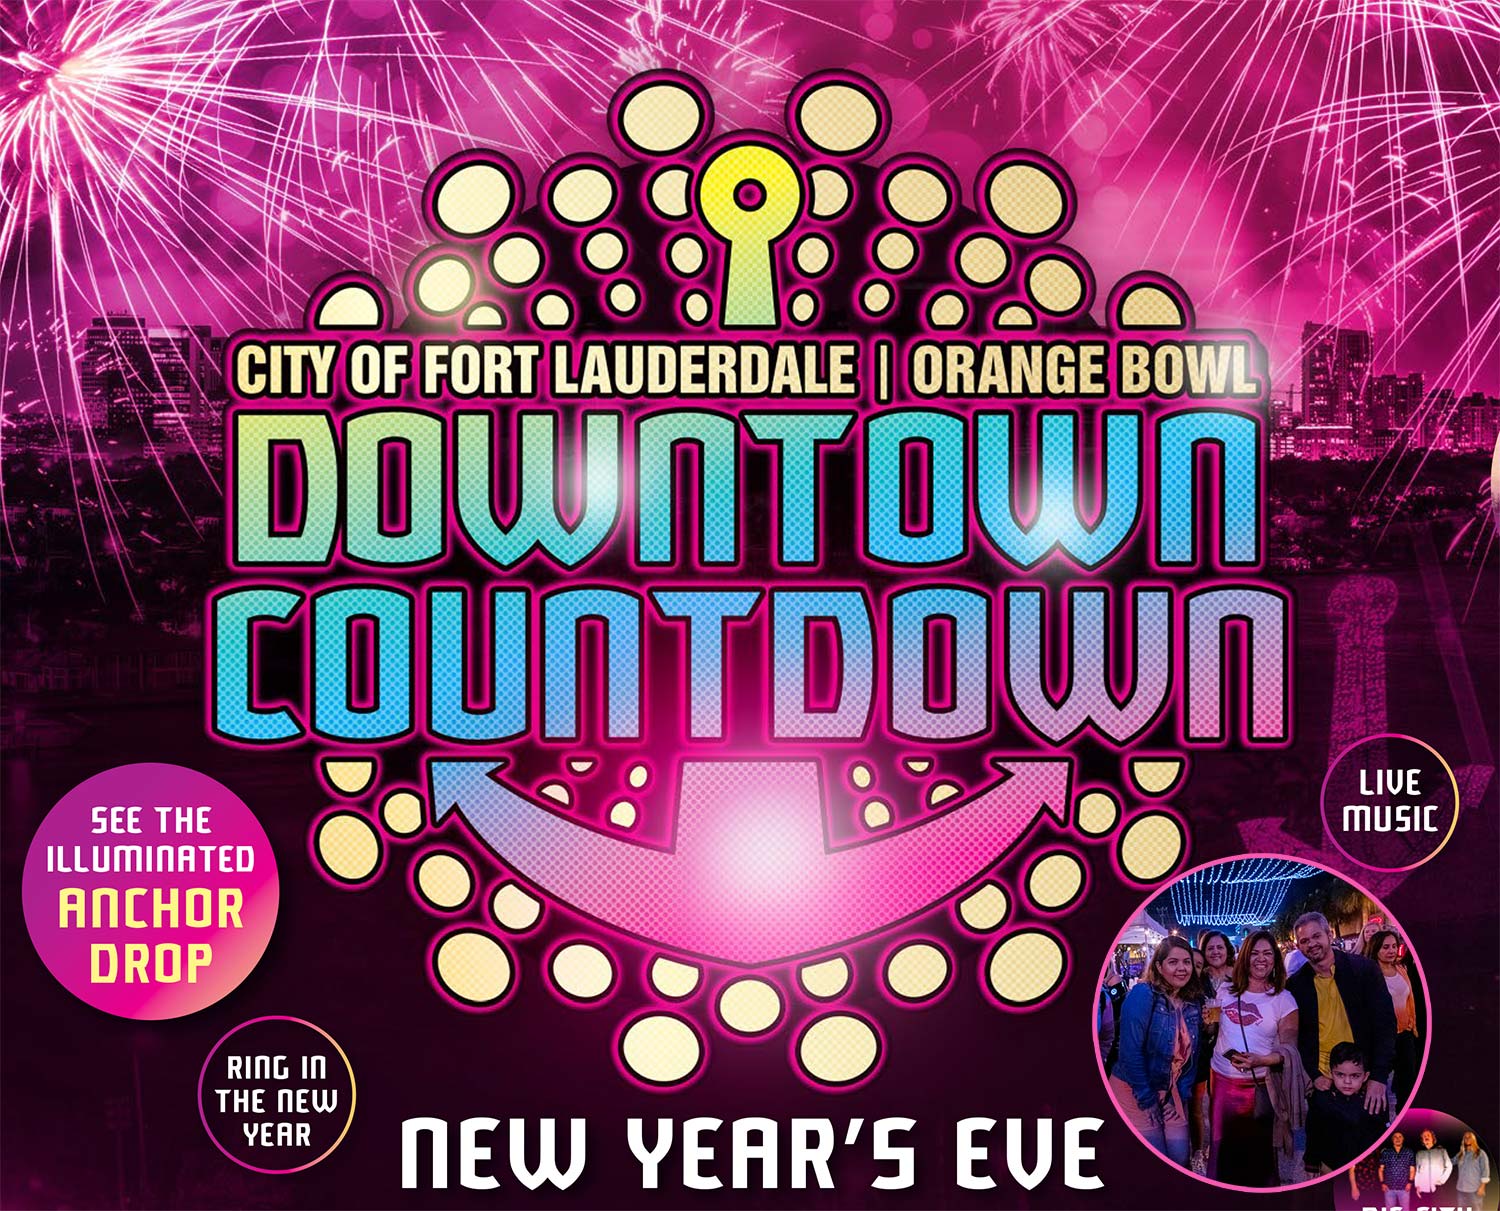 New Year’s Eve celebrations in Florida, the Fort Lauderdale Orange Bowl Downtown Countdown